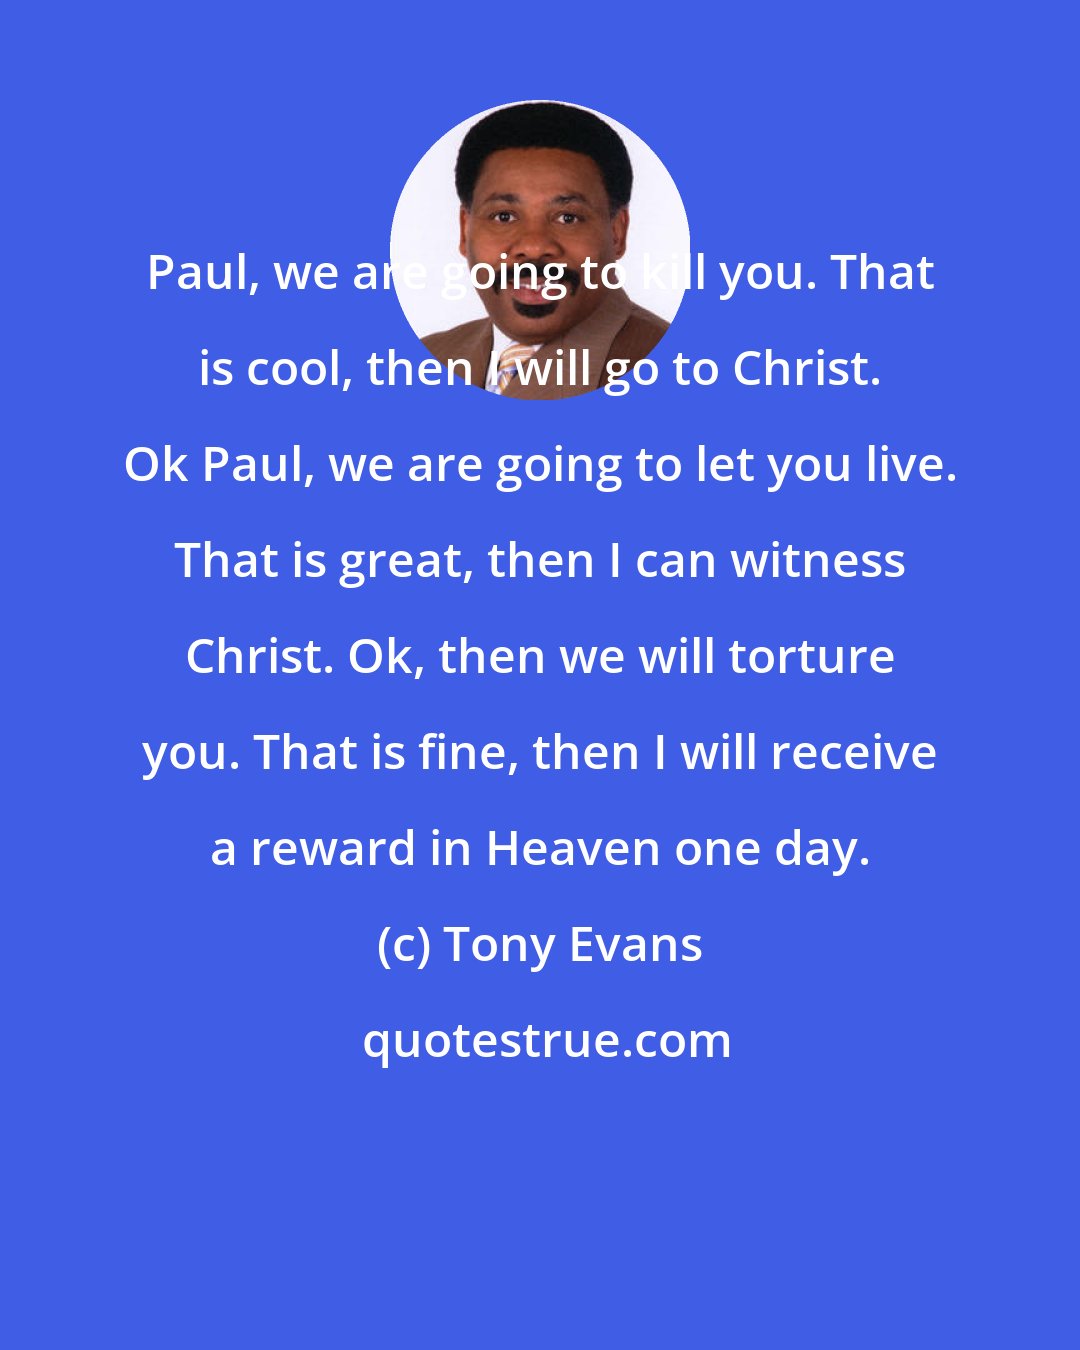 Tony Evans: Paul, we are going to kill you. That is cool, then I will go to Christ. Ok Paul, we are going to let you live. That is great, then I can witness Christ. Ok, then we will torture you. That is fine, then I will receive a reward in Heaven one day.